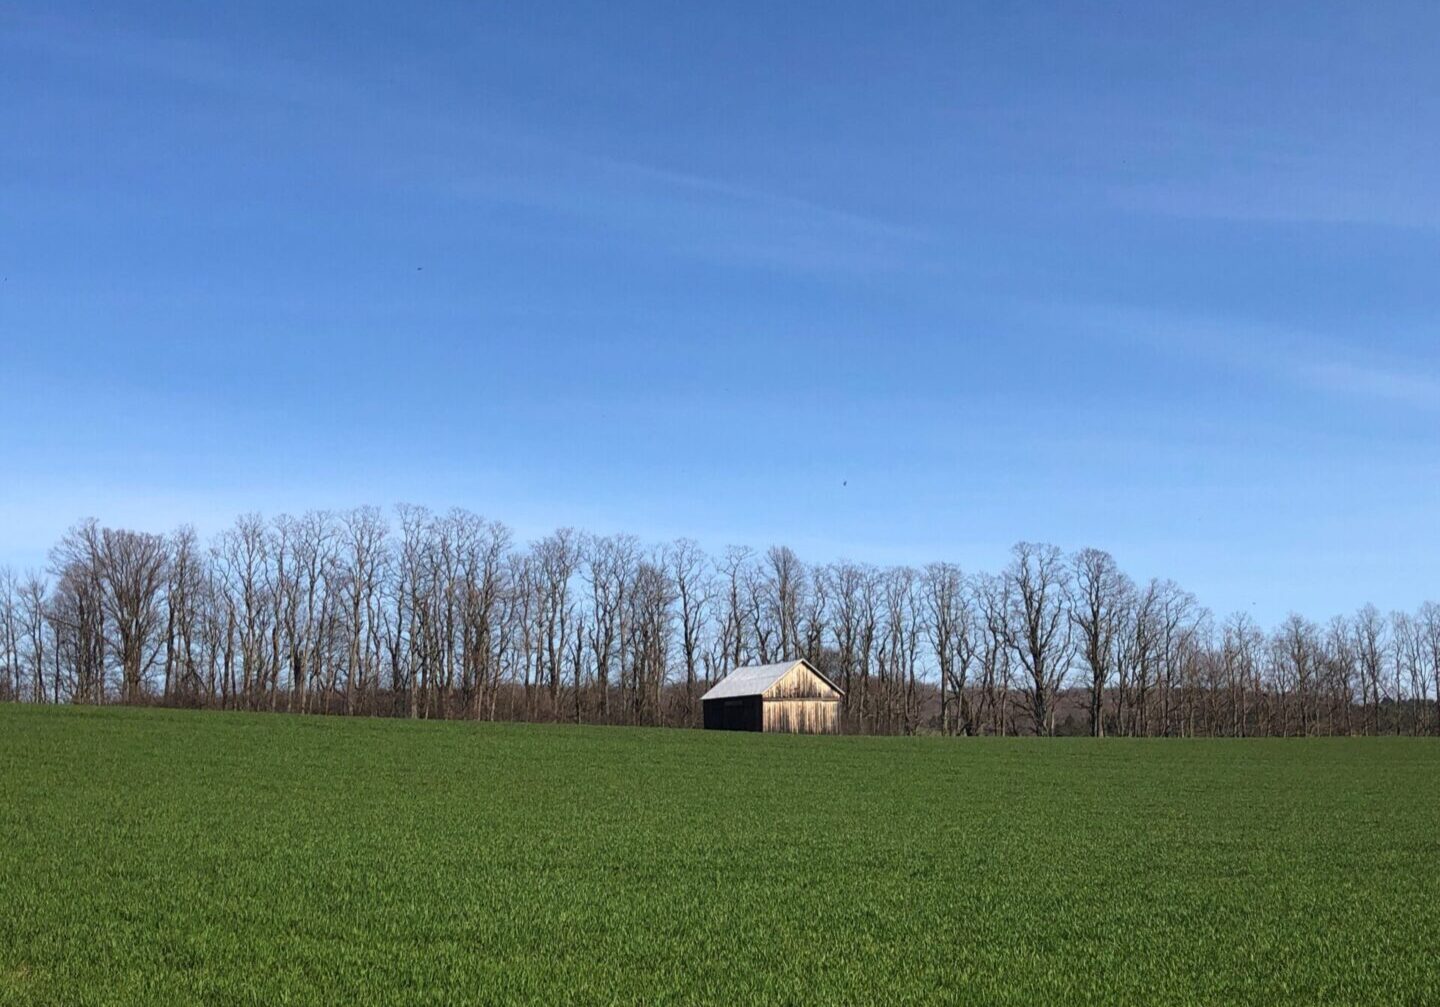 A barn in the middle of a field with trees behind it.